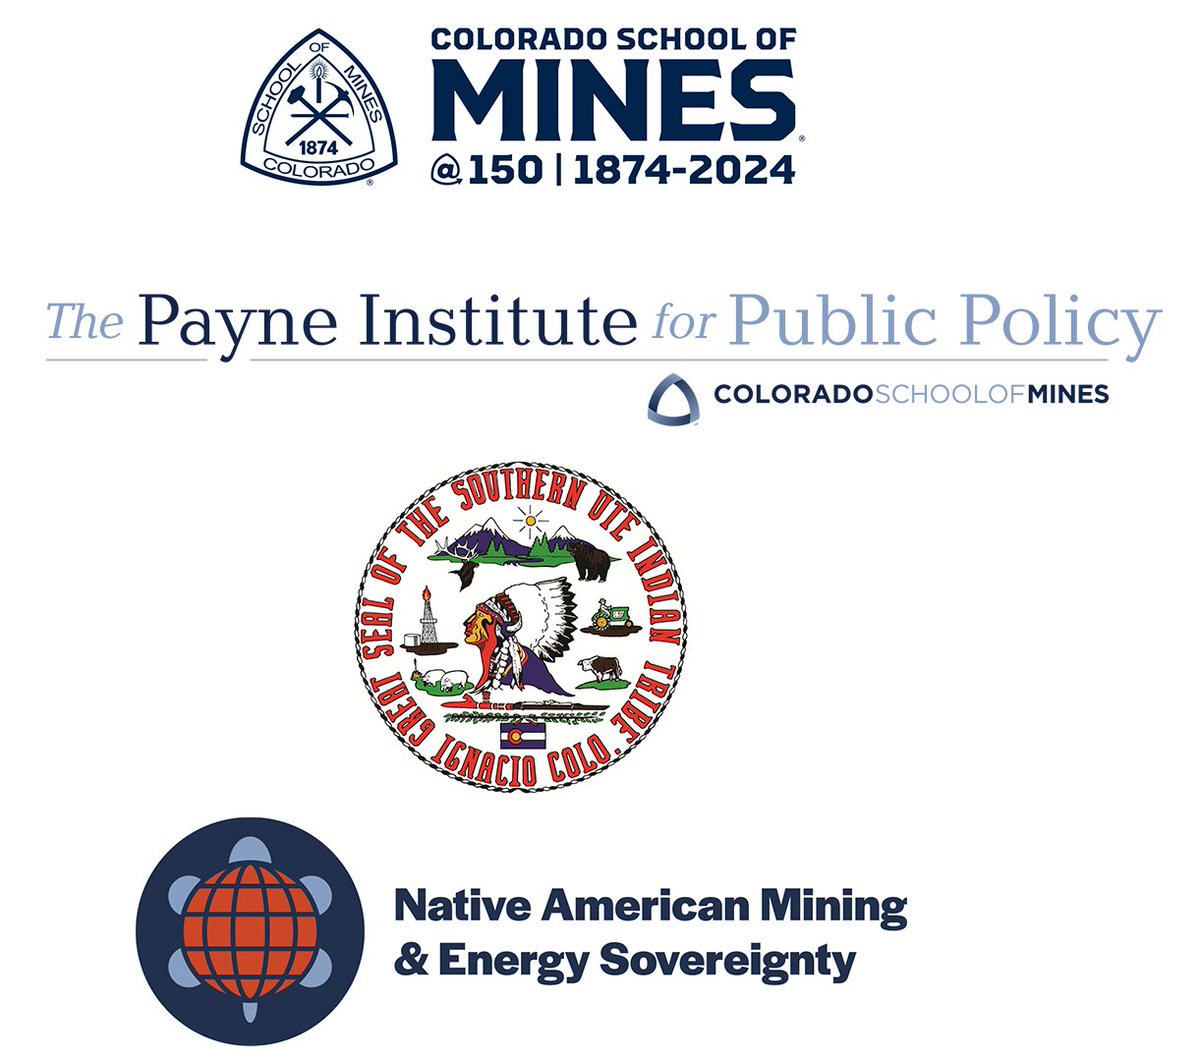 Please join the @payneinstitute for the Native American Mining & Energy Sovereignty Symposium (NAMES) May 20-21 in Ignacio, CO. (We will waive registration fees for Native American attendees, & are actively seeking supporters for the NAMES initiative.) payneinstitute.mines.edu/event/2024-nat…